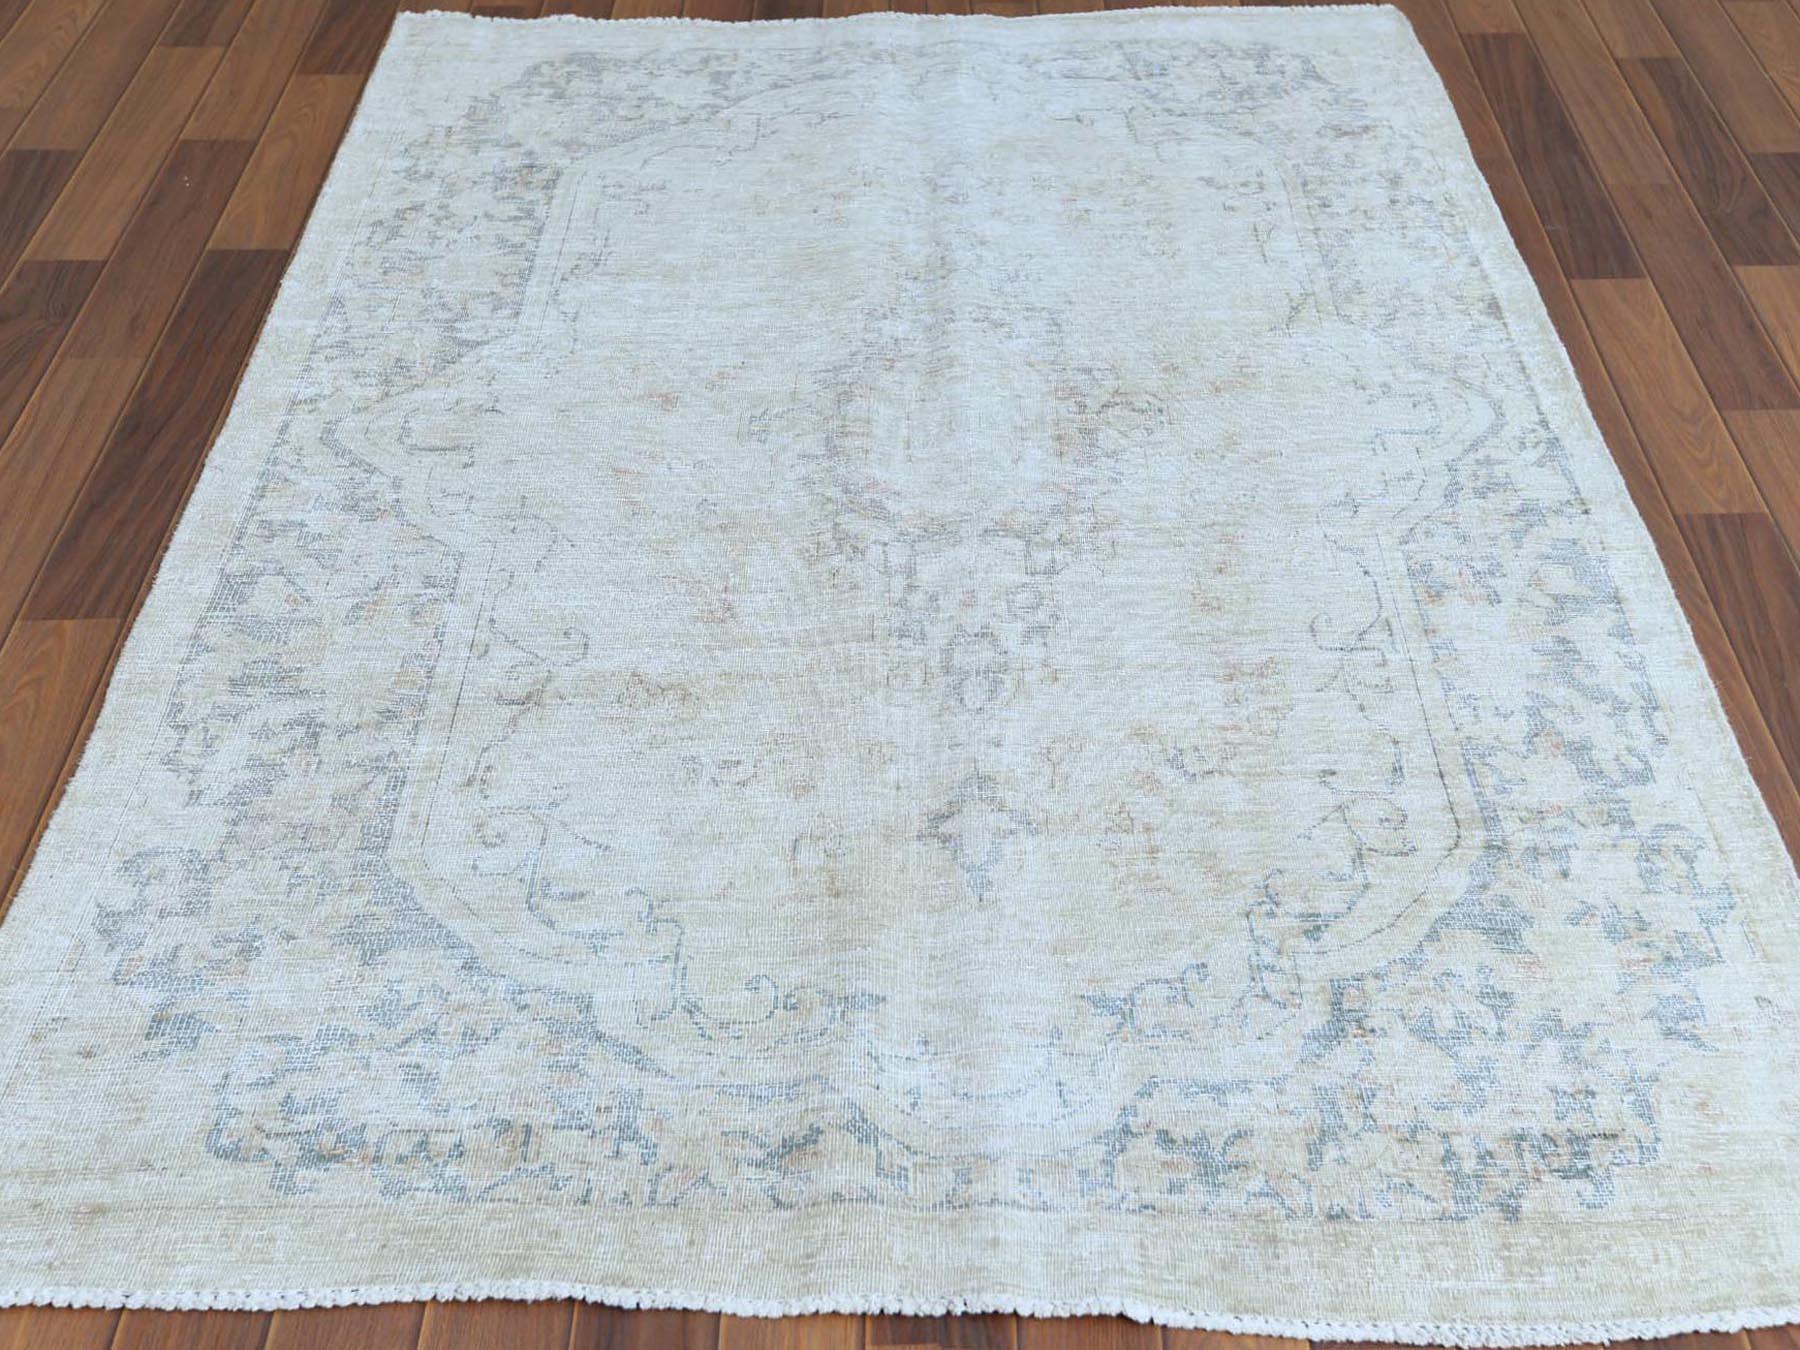 Medieval Beige Washed Out Old Persian Kerman Worn Down Pure Wool Hand Knotted Rug